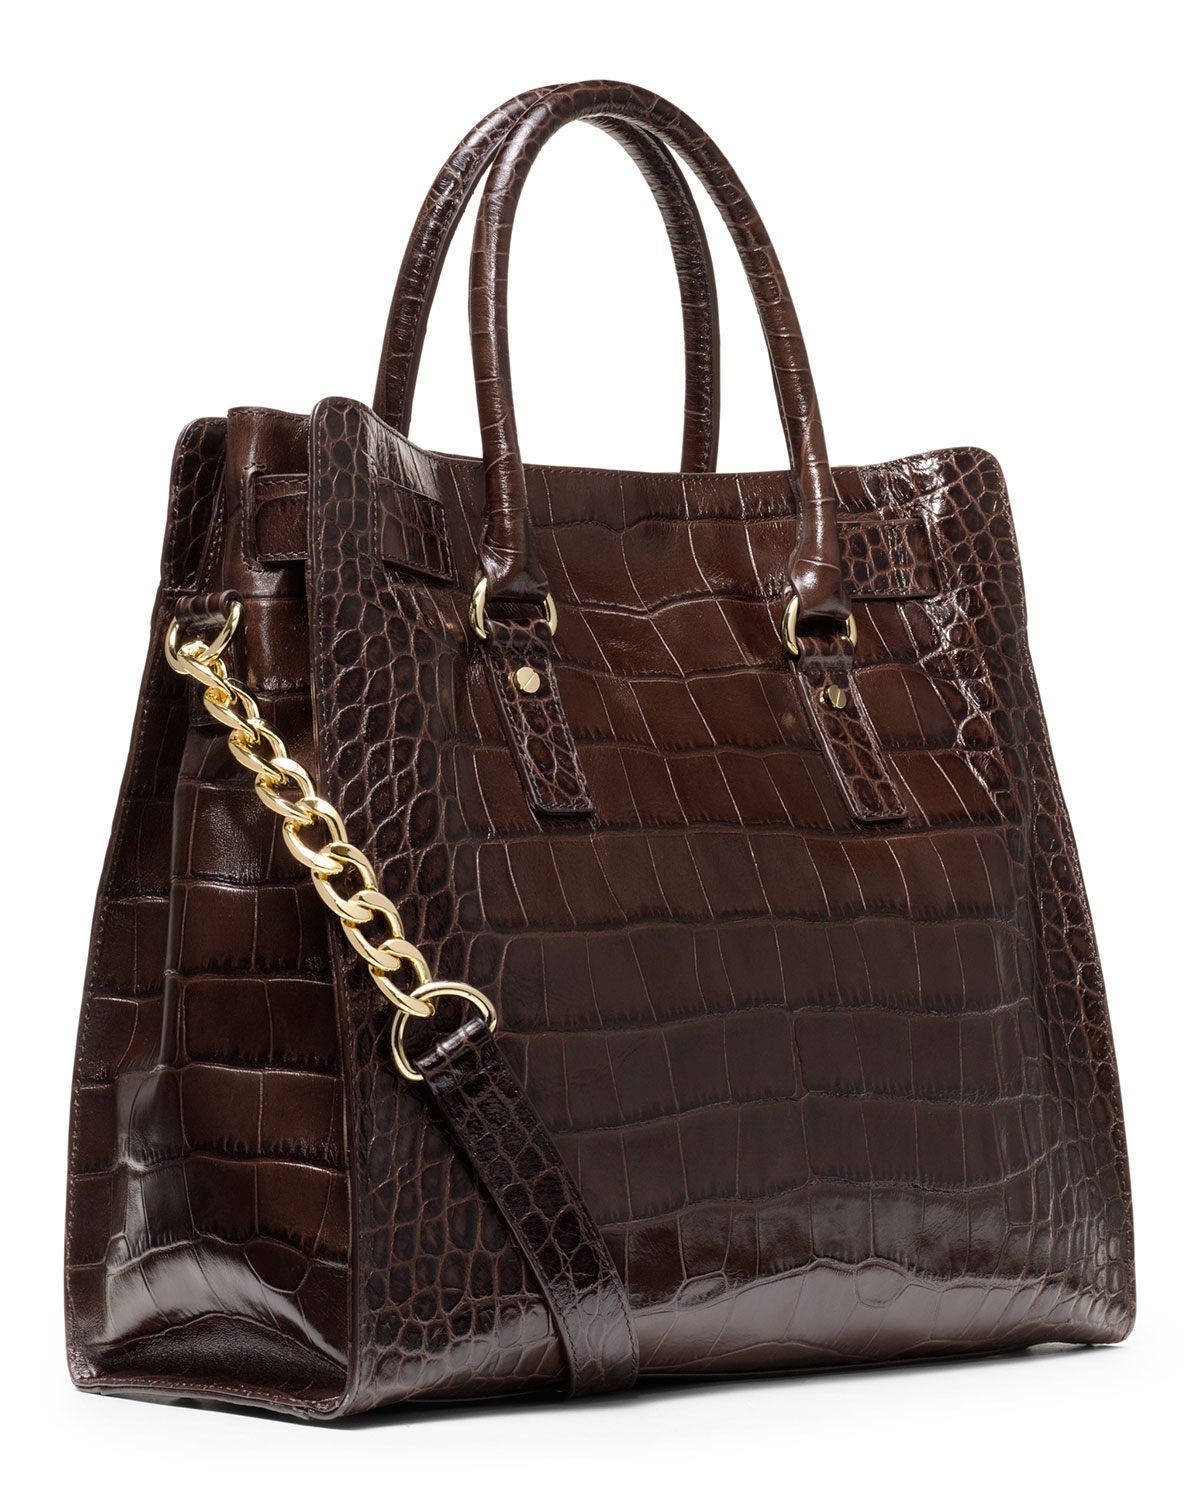 MICHAEL Michael Kors Hamilton Leather Large Northsouth Tote Bag in Brown (Black) - Lyst